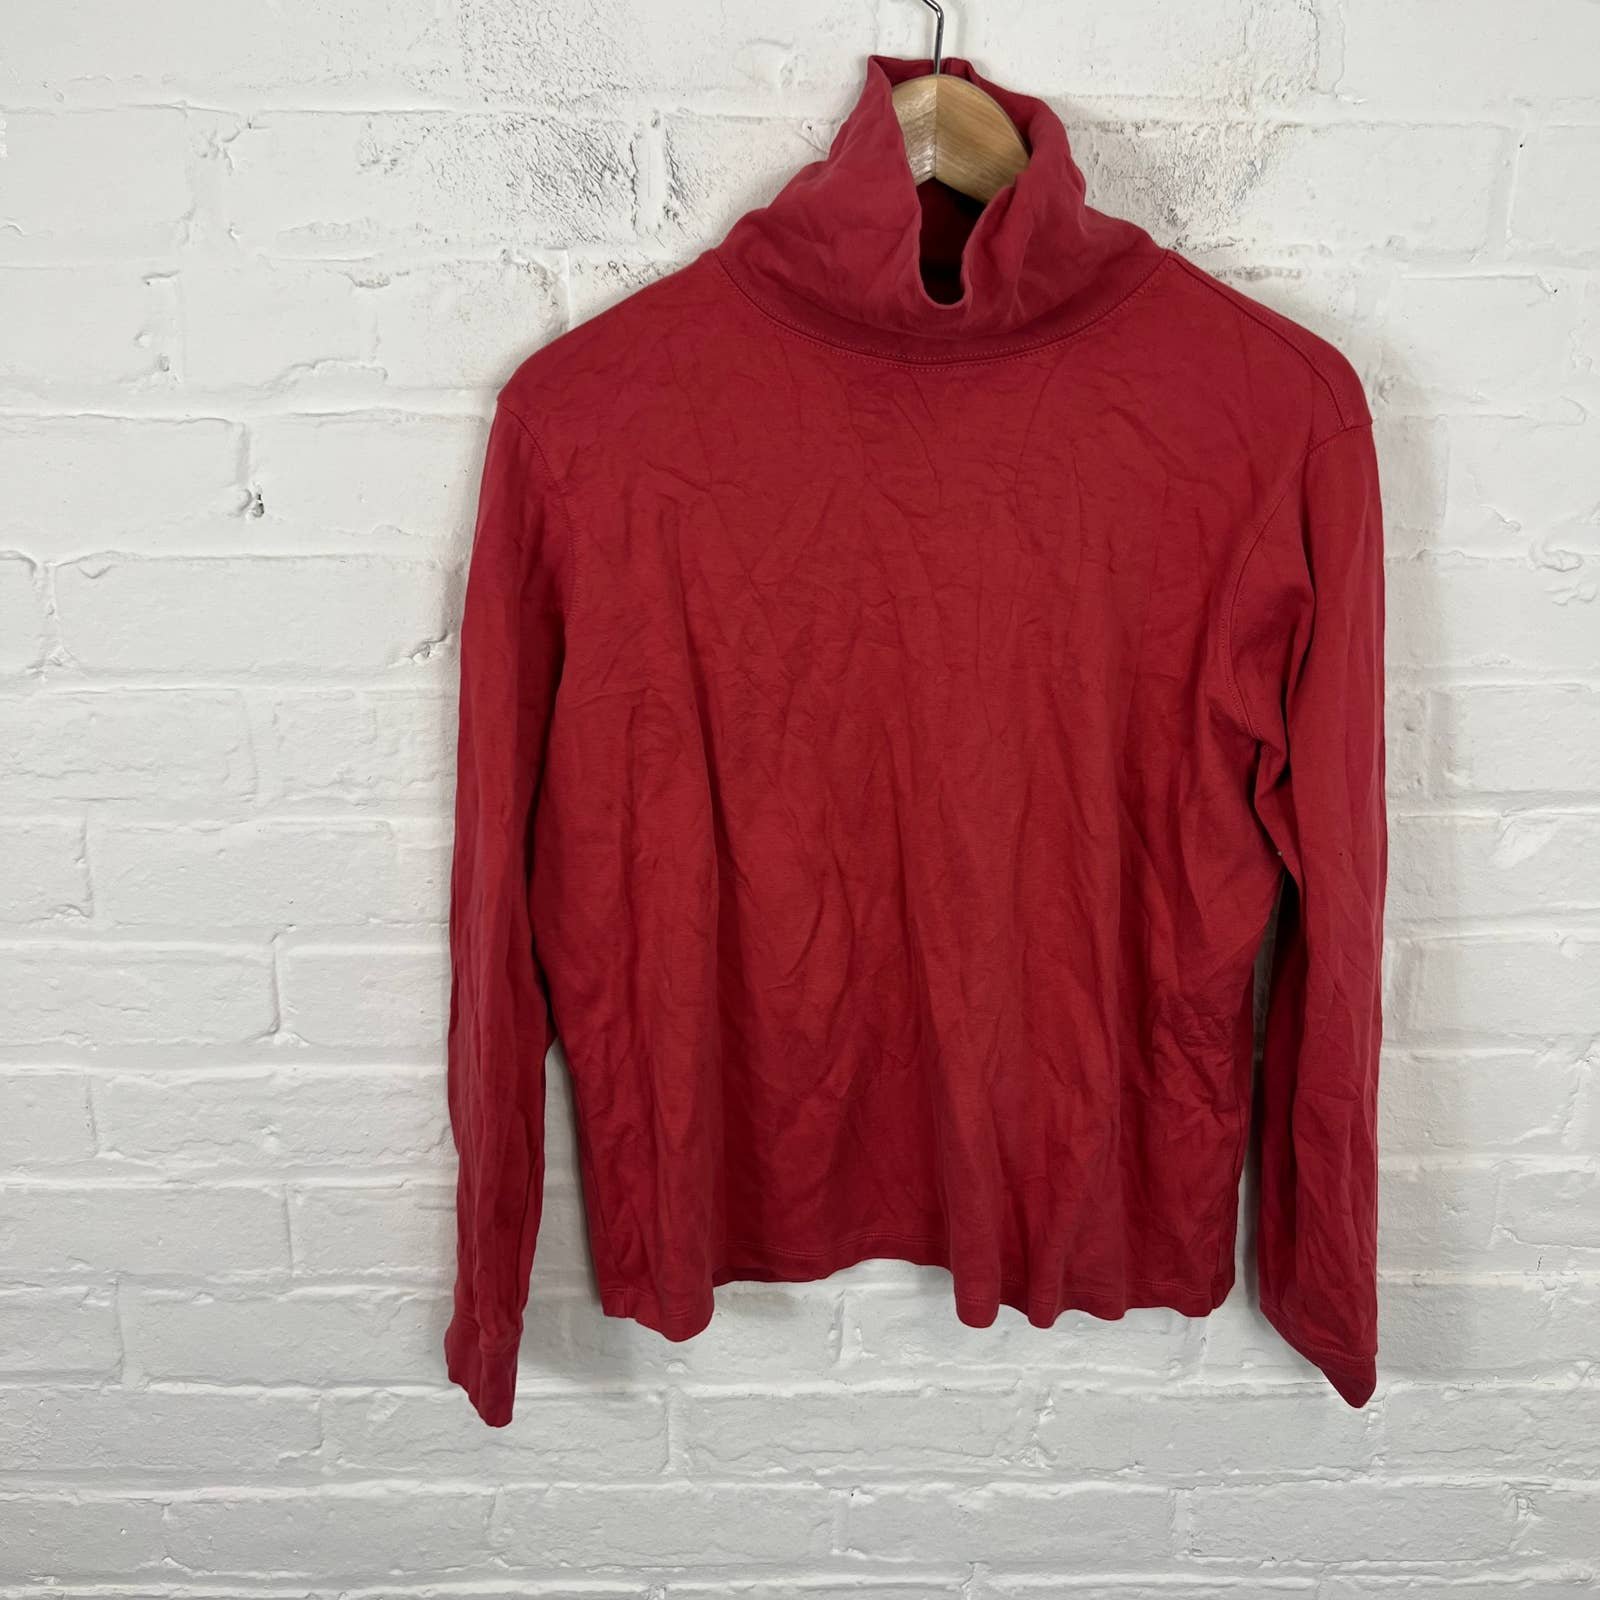 Promotions  L.L. Bean Women´s Turtleneck Pullover Sweater Long Sleeve Solid Red Size XLP fPBrz2Gc3 Discount